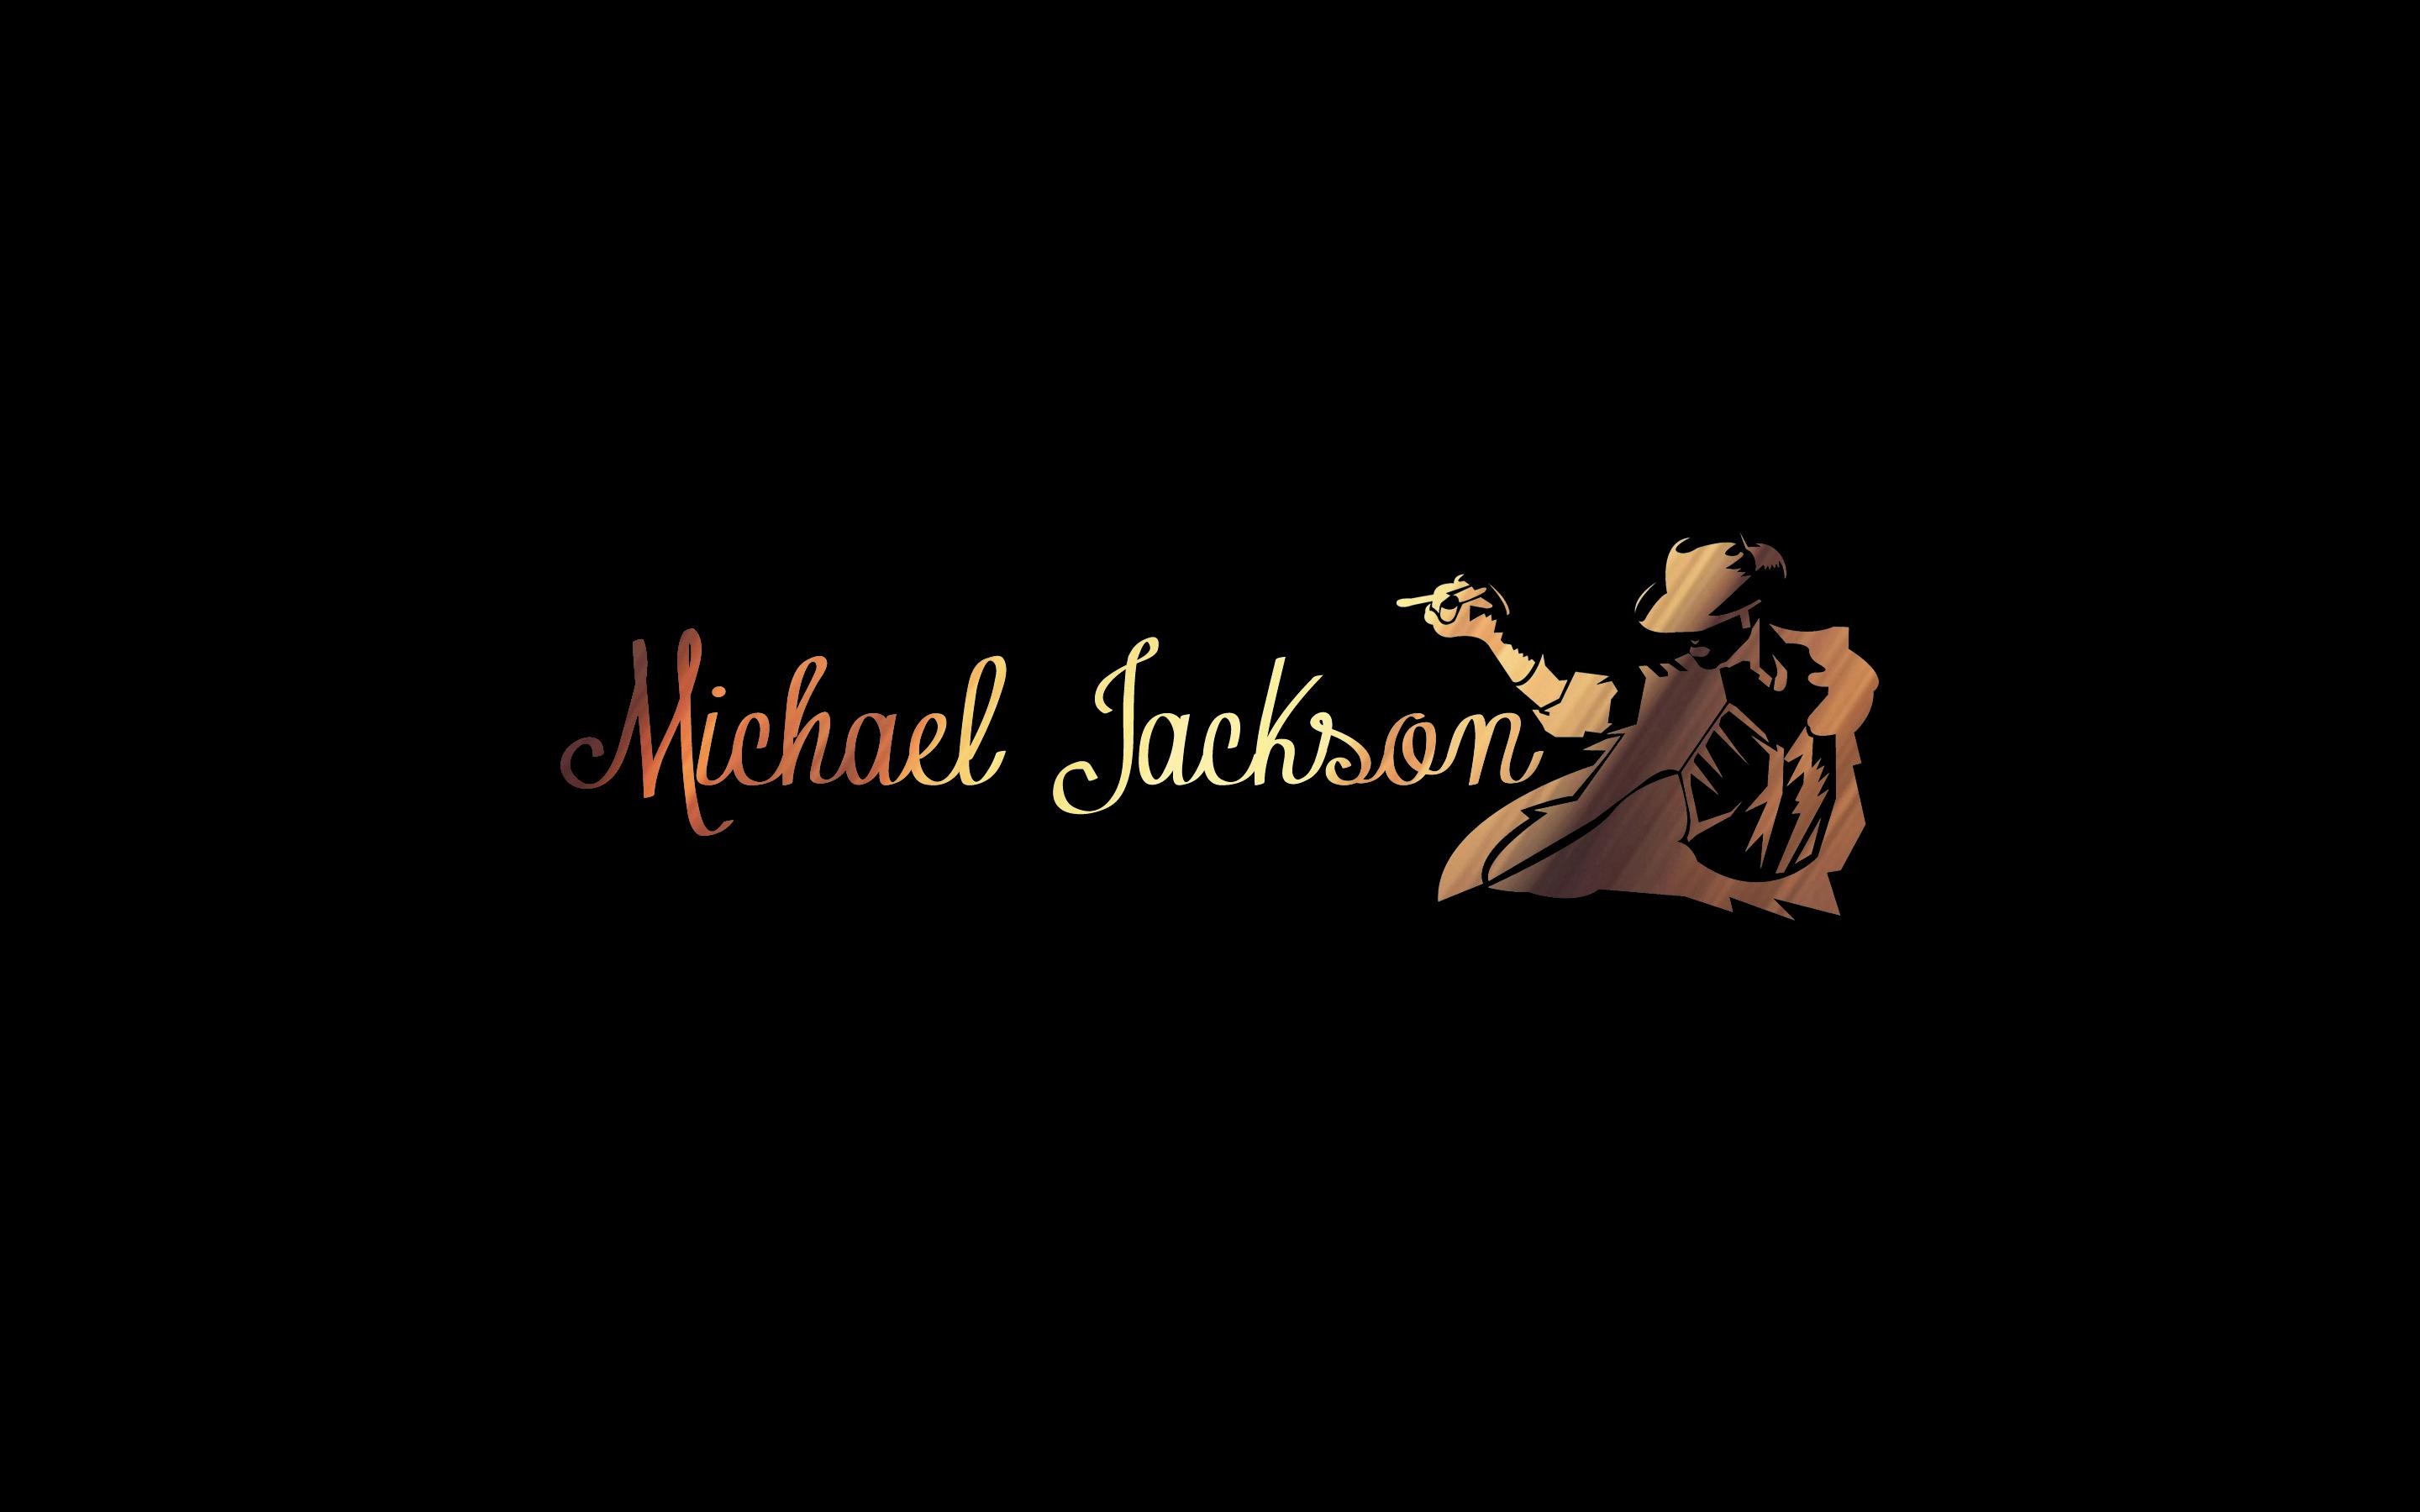 Michael Jackson Hd Wallpapers Images 40 2880x1800